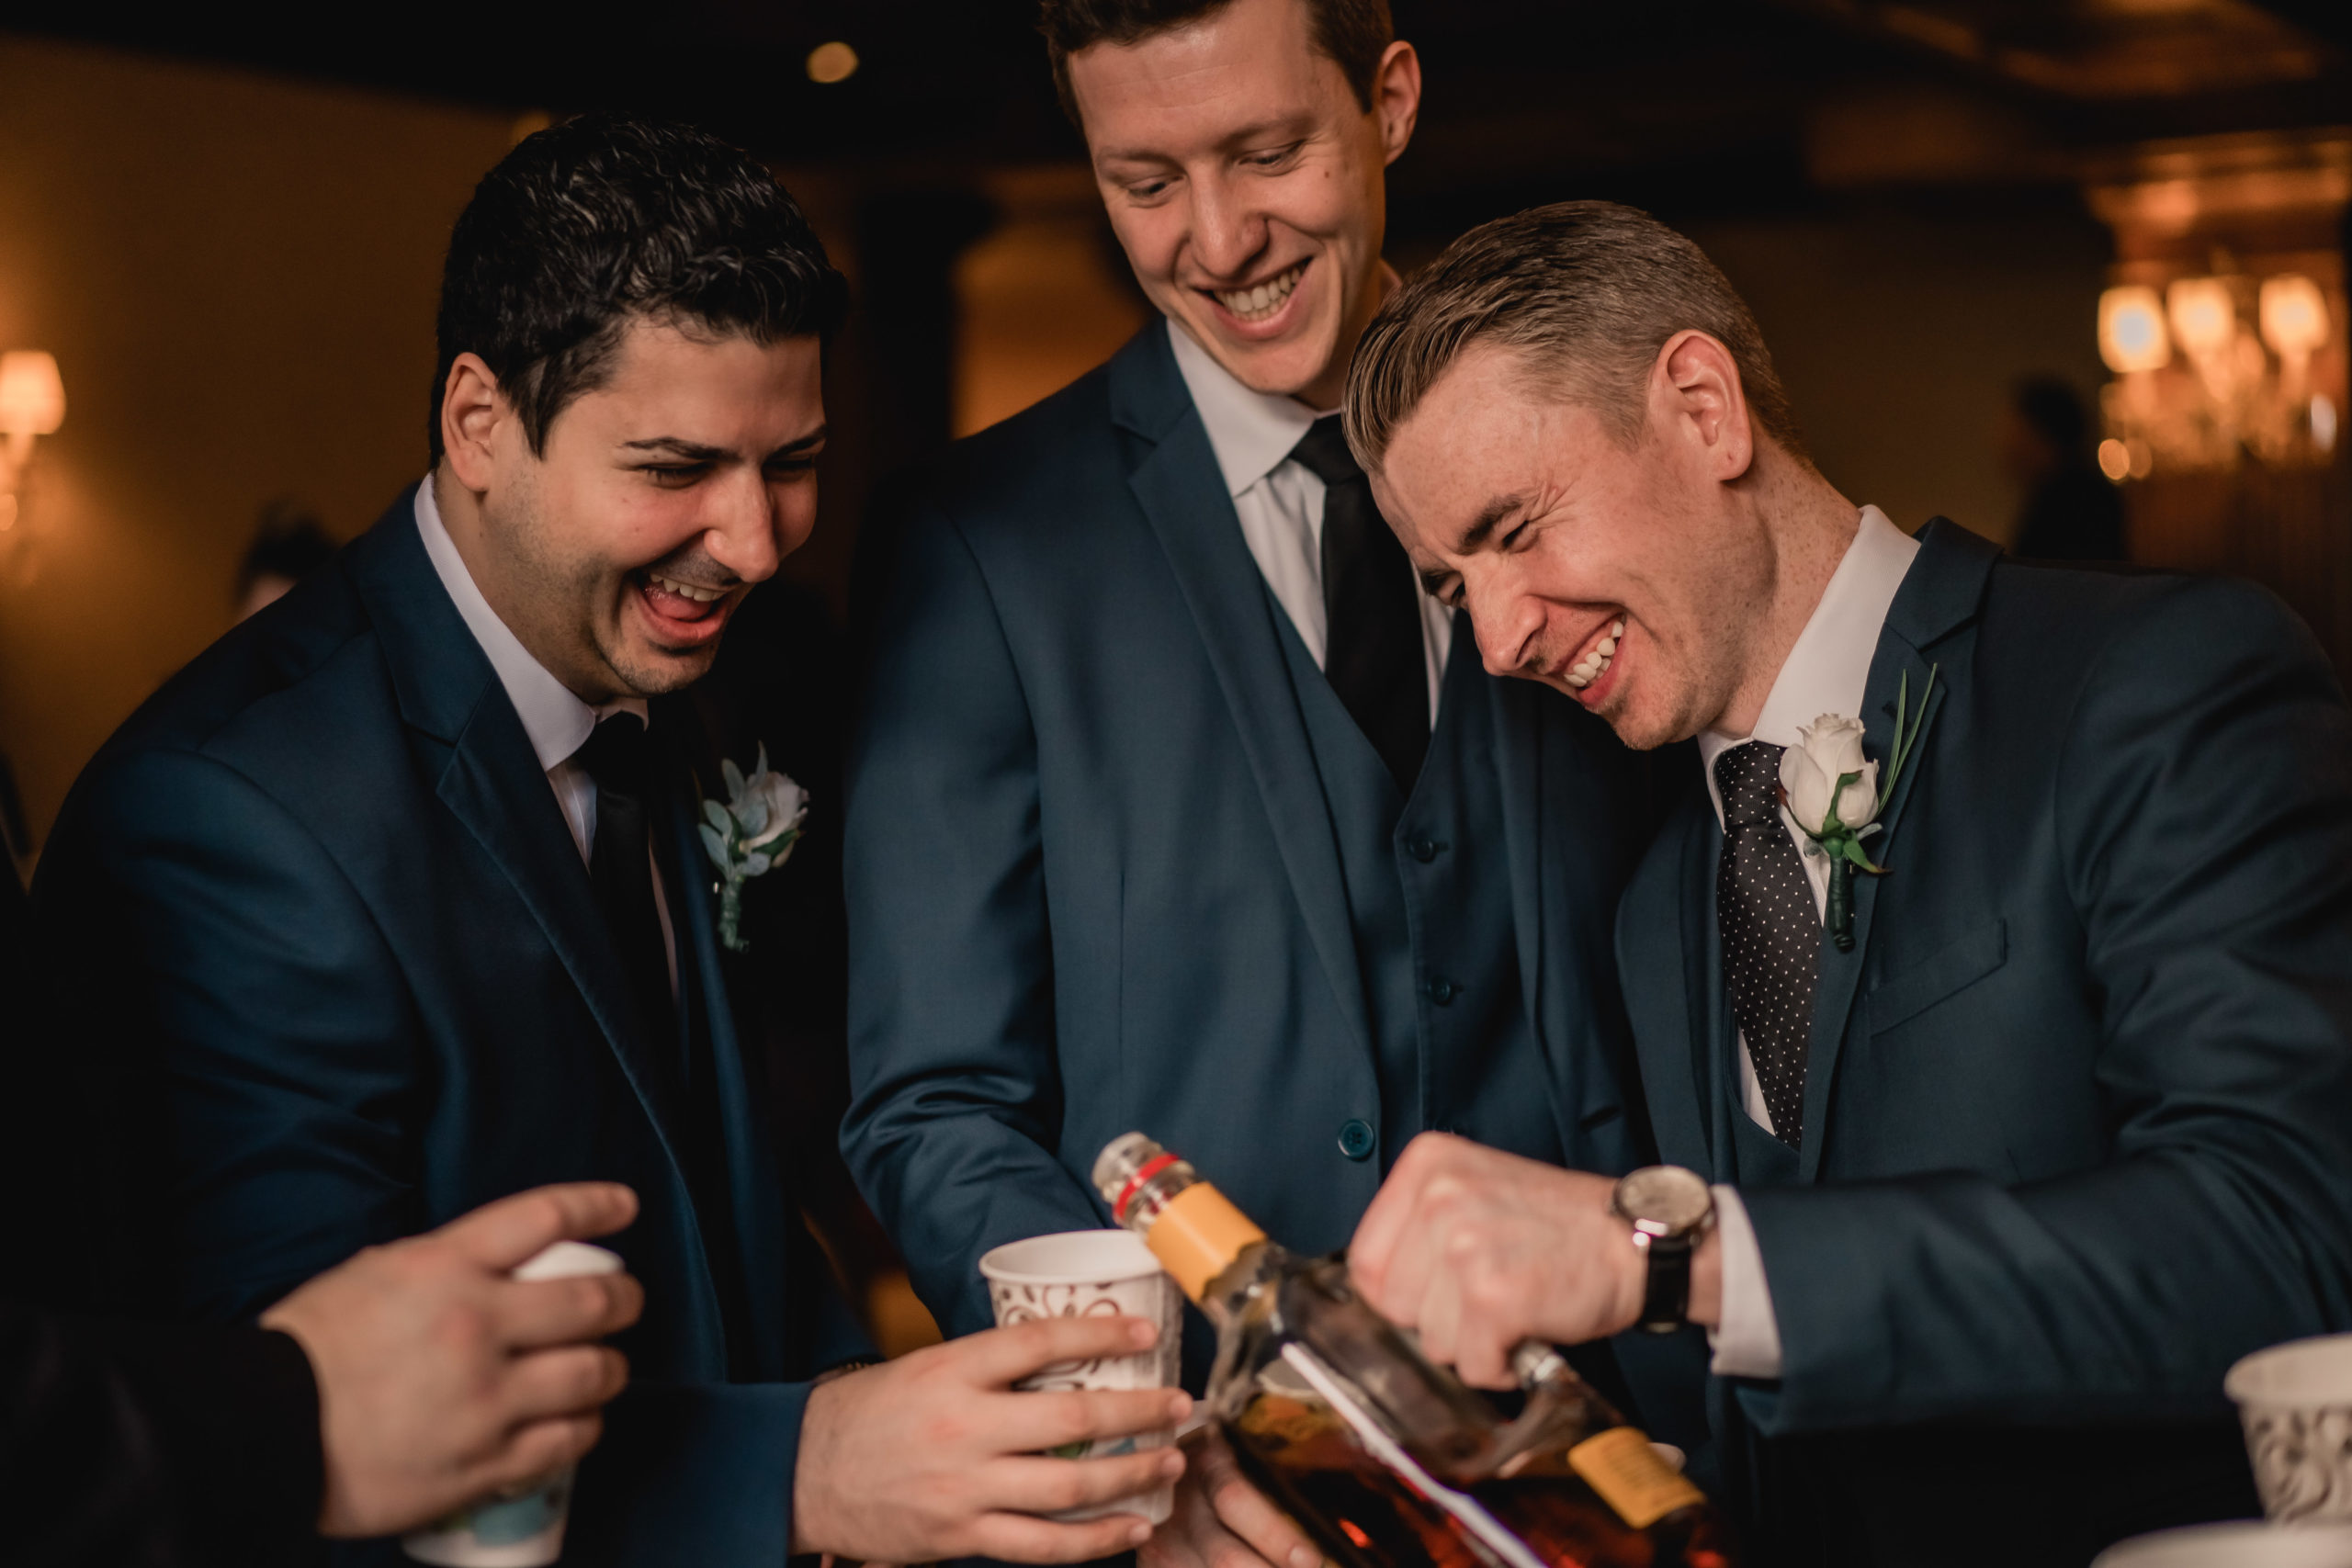 New Jersey Wedding Photographer,The Madison Hotel Wedding, The Madison Hotel Wedding Photographer, New Jersey Wedding Venues, NJ Wedding Photographer, Unique Wedding Ideas, The Madison Hotel Morristown NJ, Modern Wedding Couple, Wedding Inspiration, Wedding Planning, Morristown Wedding Photographer, Summer Wedding, Morristown NJ Photographer, candid photo of a groom pouring himself and his groomsmen a drink while laughing before the wedding ceremony at the madison hotel in morristown 